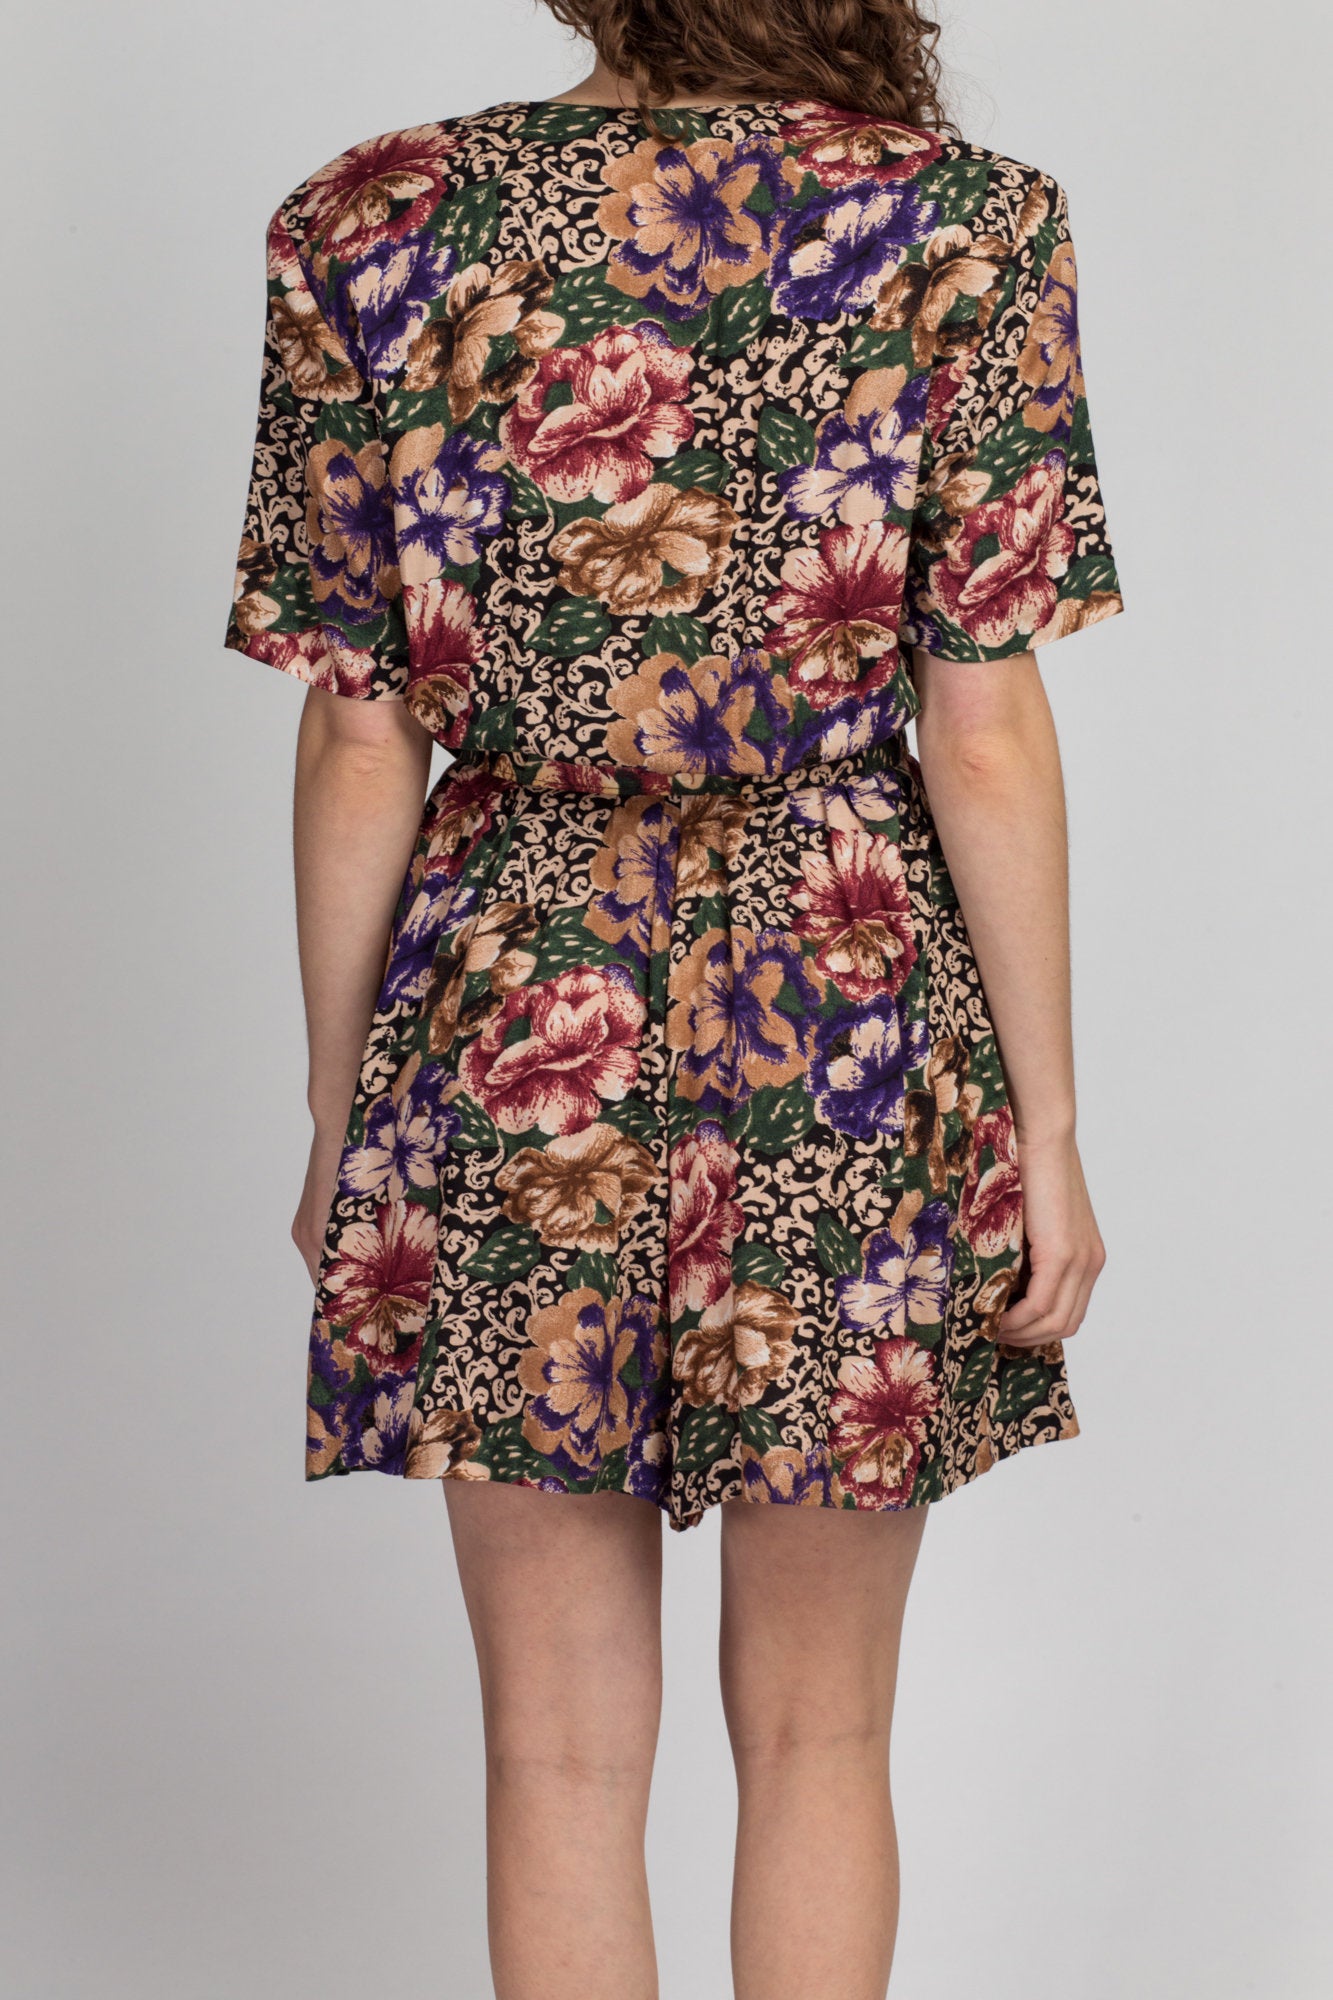 Vintage Floral Belted Romper - Medium to Large | 80s 90s Grunge Button Up Outfit